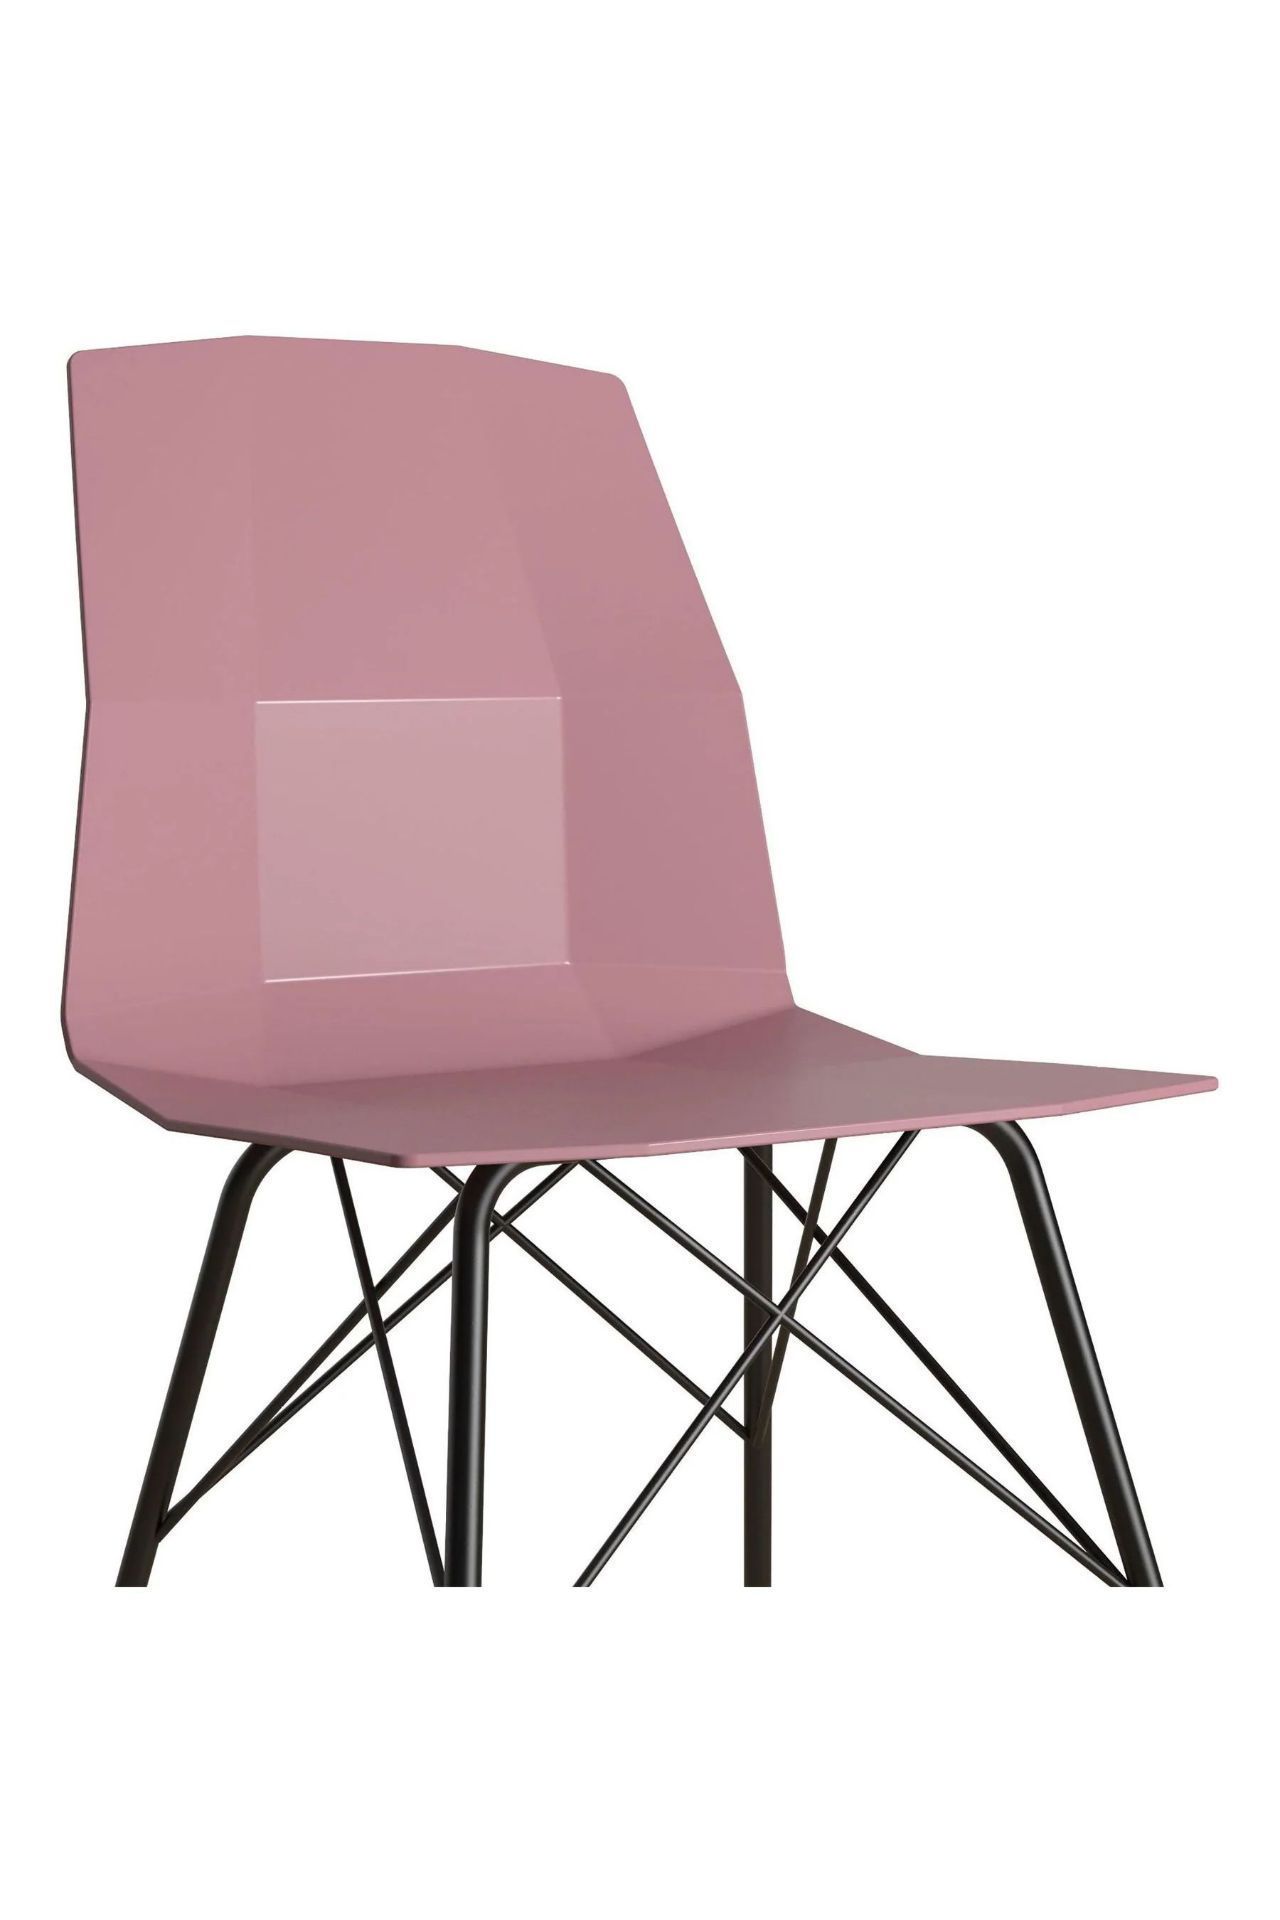 BRAND NEW SET OF 2 PINK COSMOLIVING MODULAR DINING CHAIRS RRP £299 S1RA